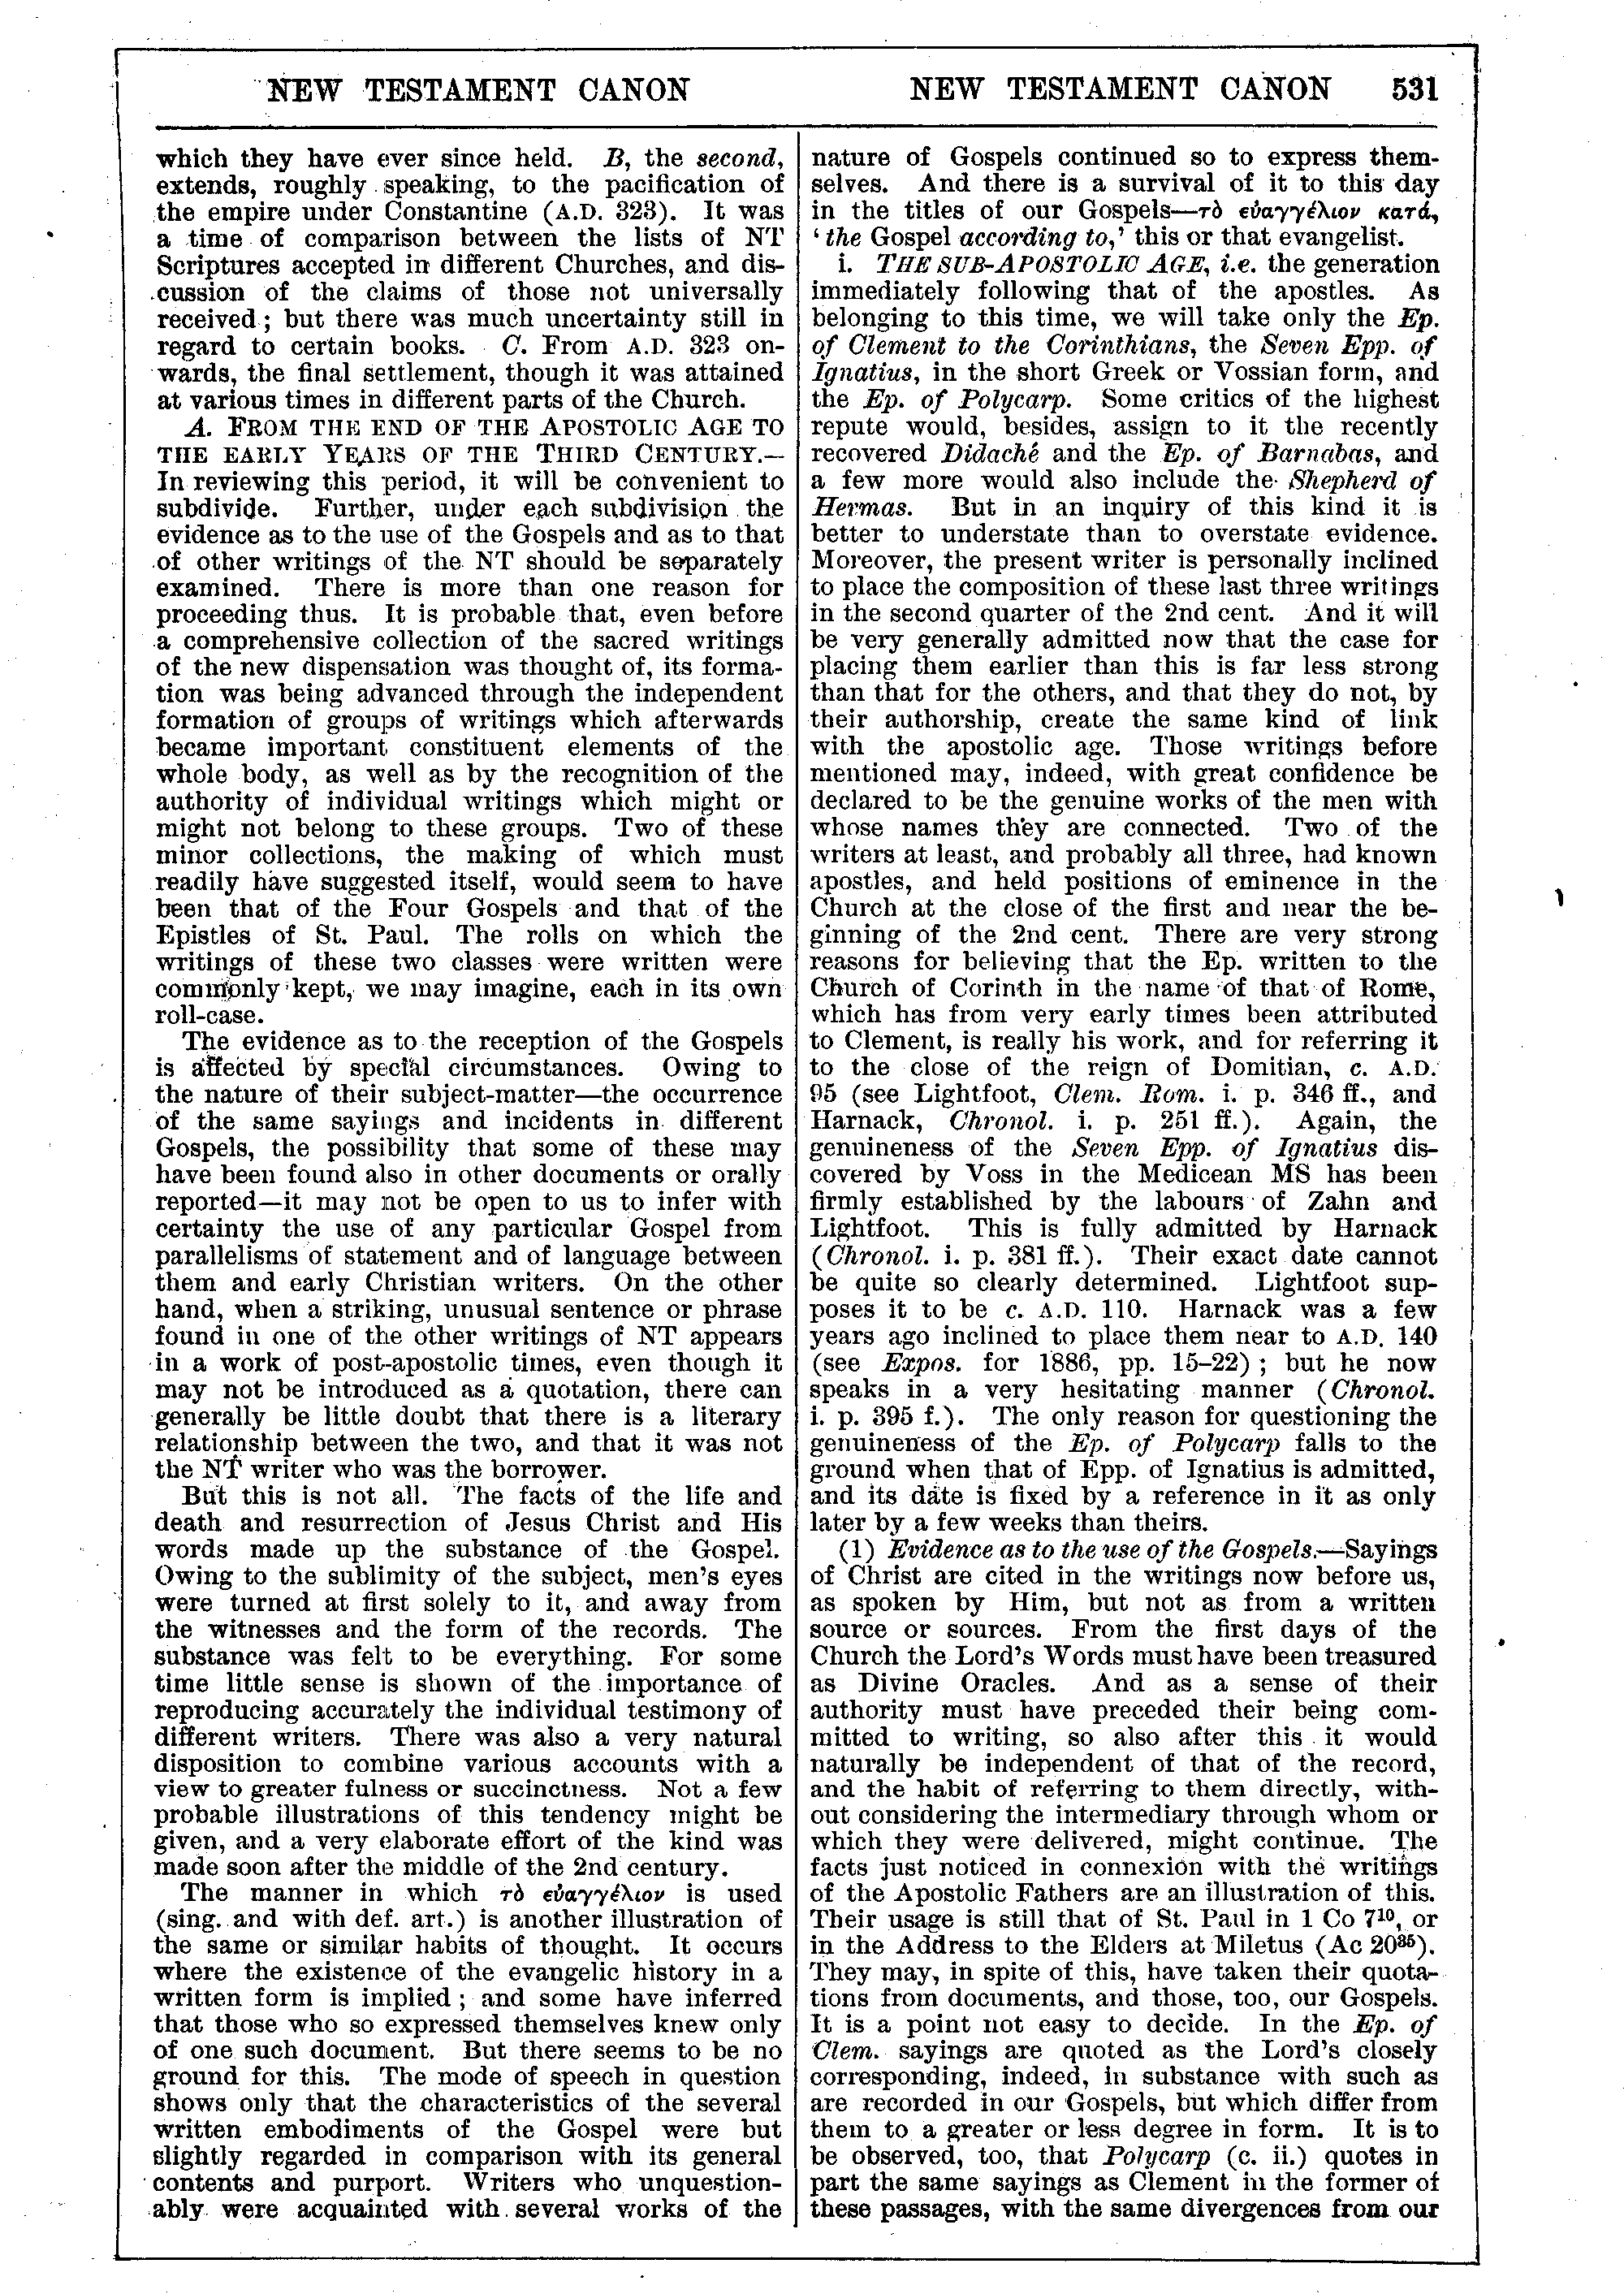 Image of page 531